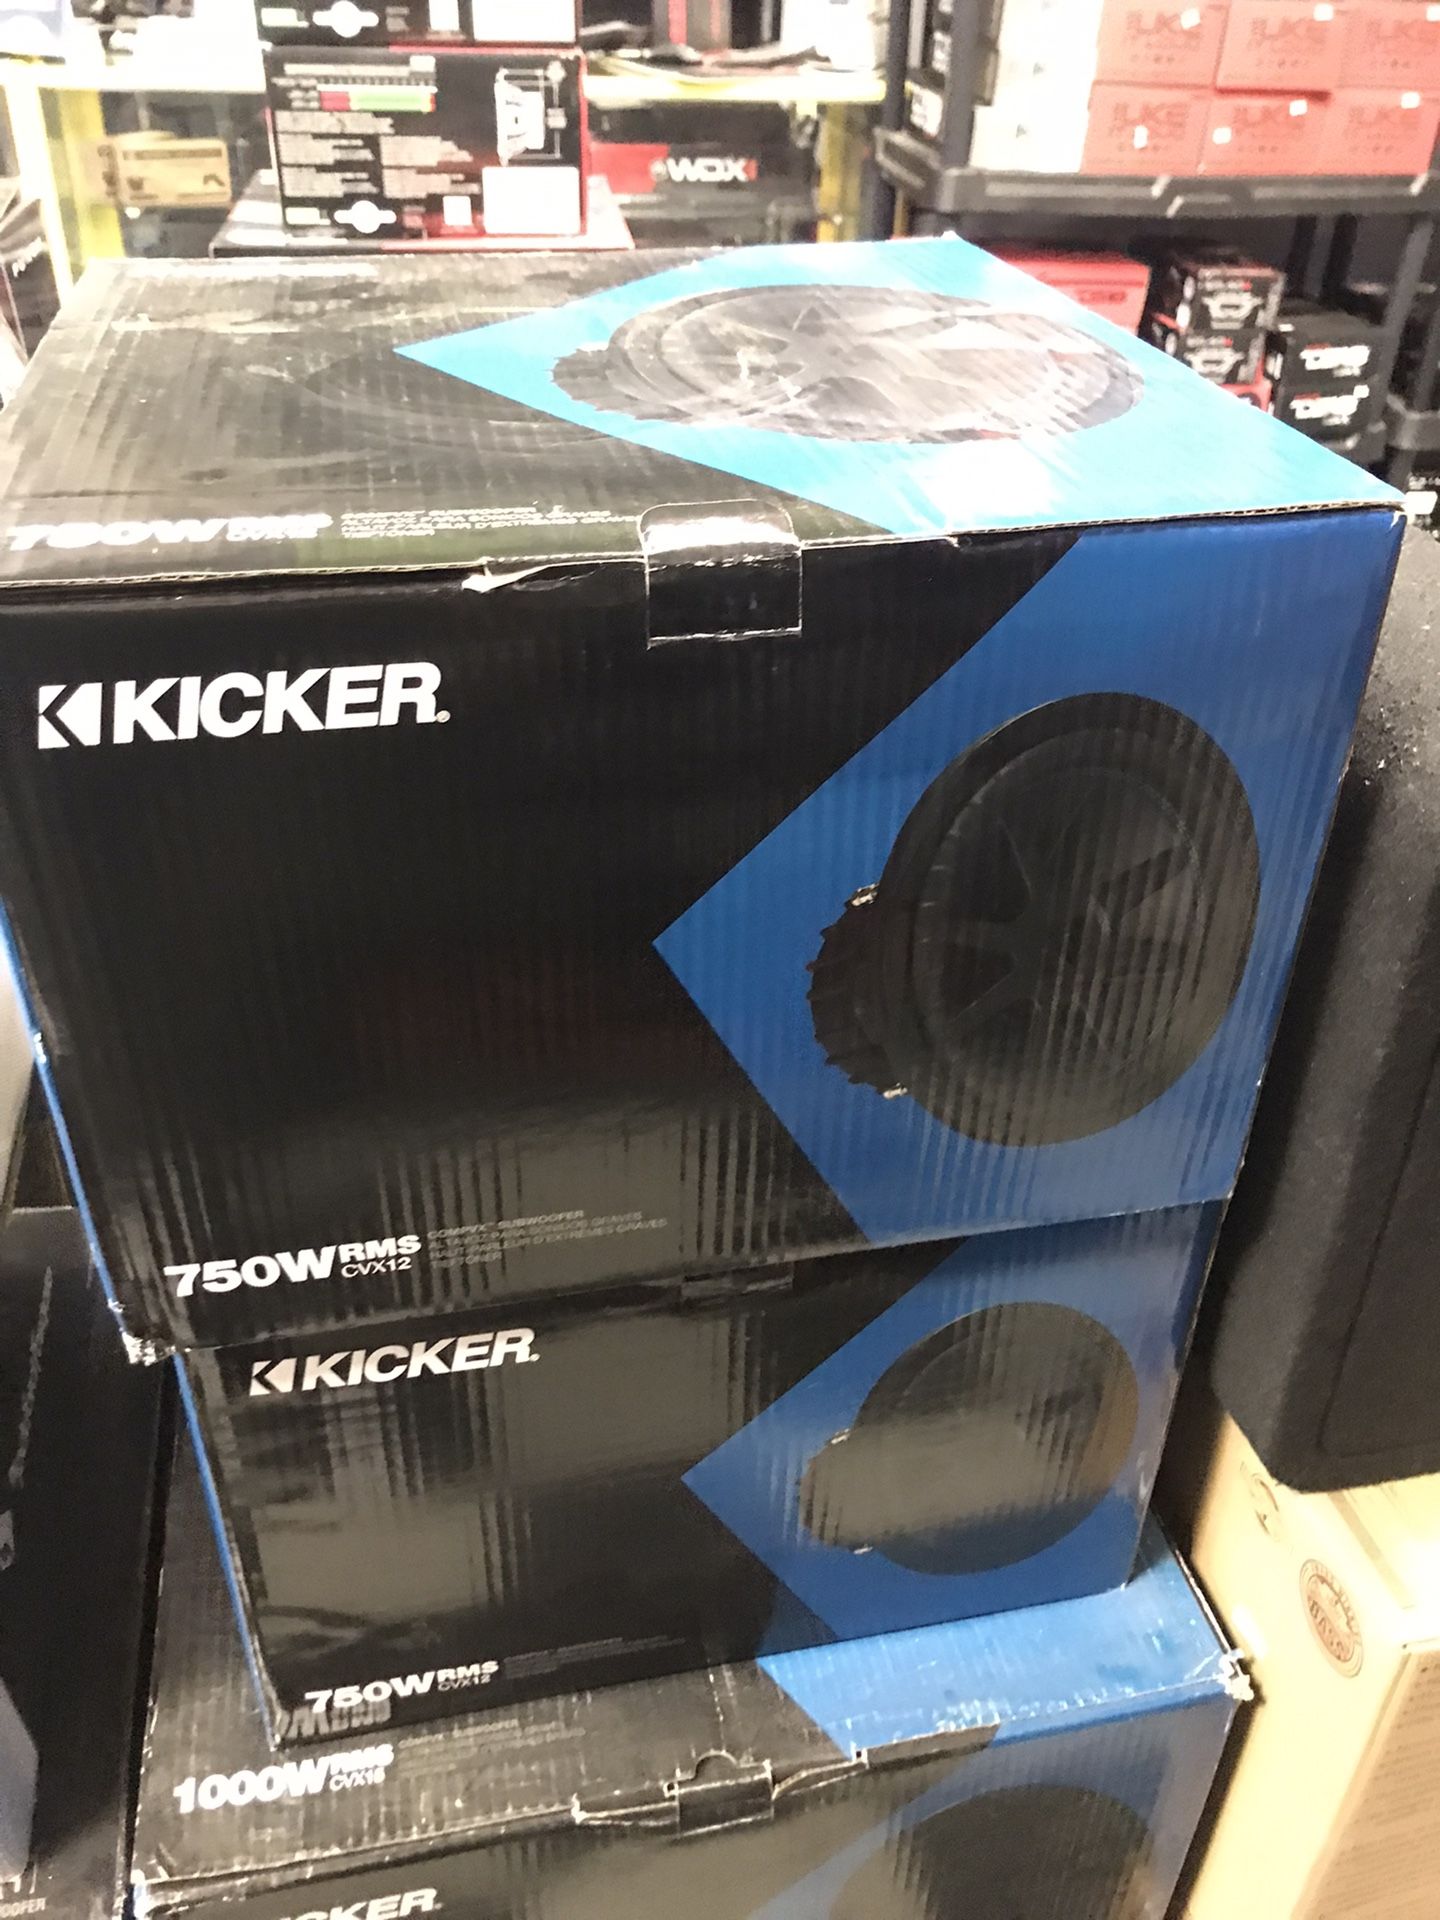 Kicker Cvx12 On Sale Today for 199.99